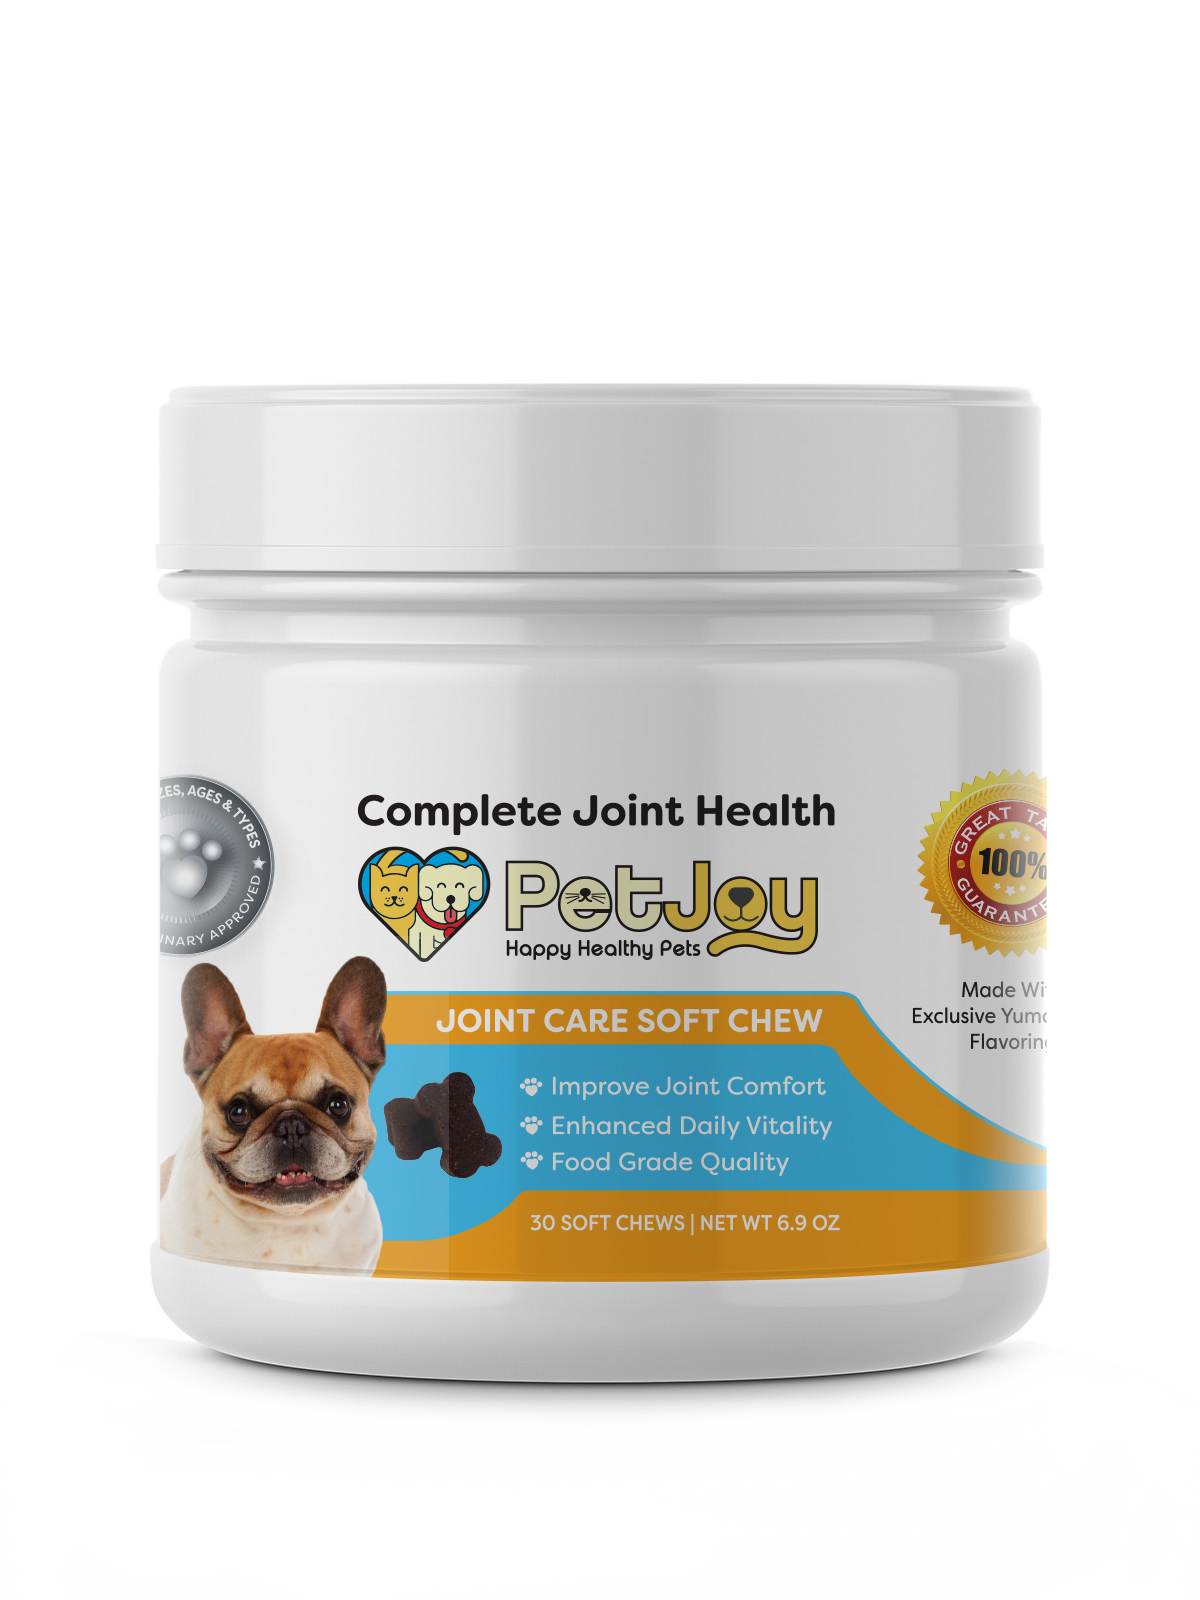 Complete Joint Health